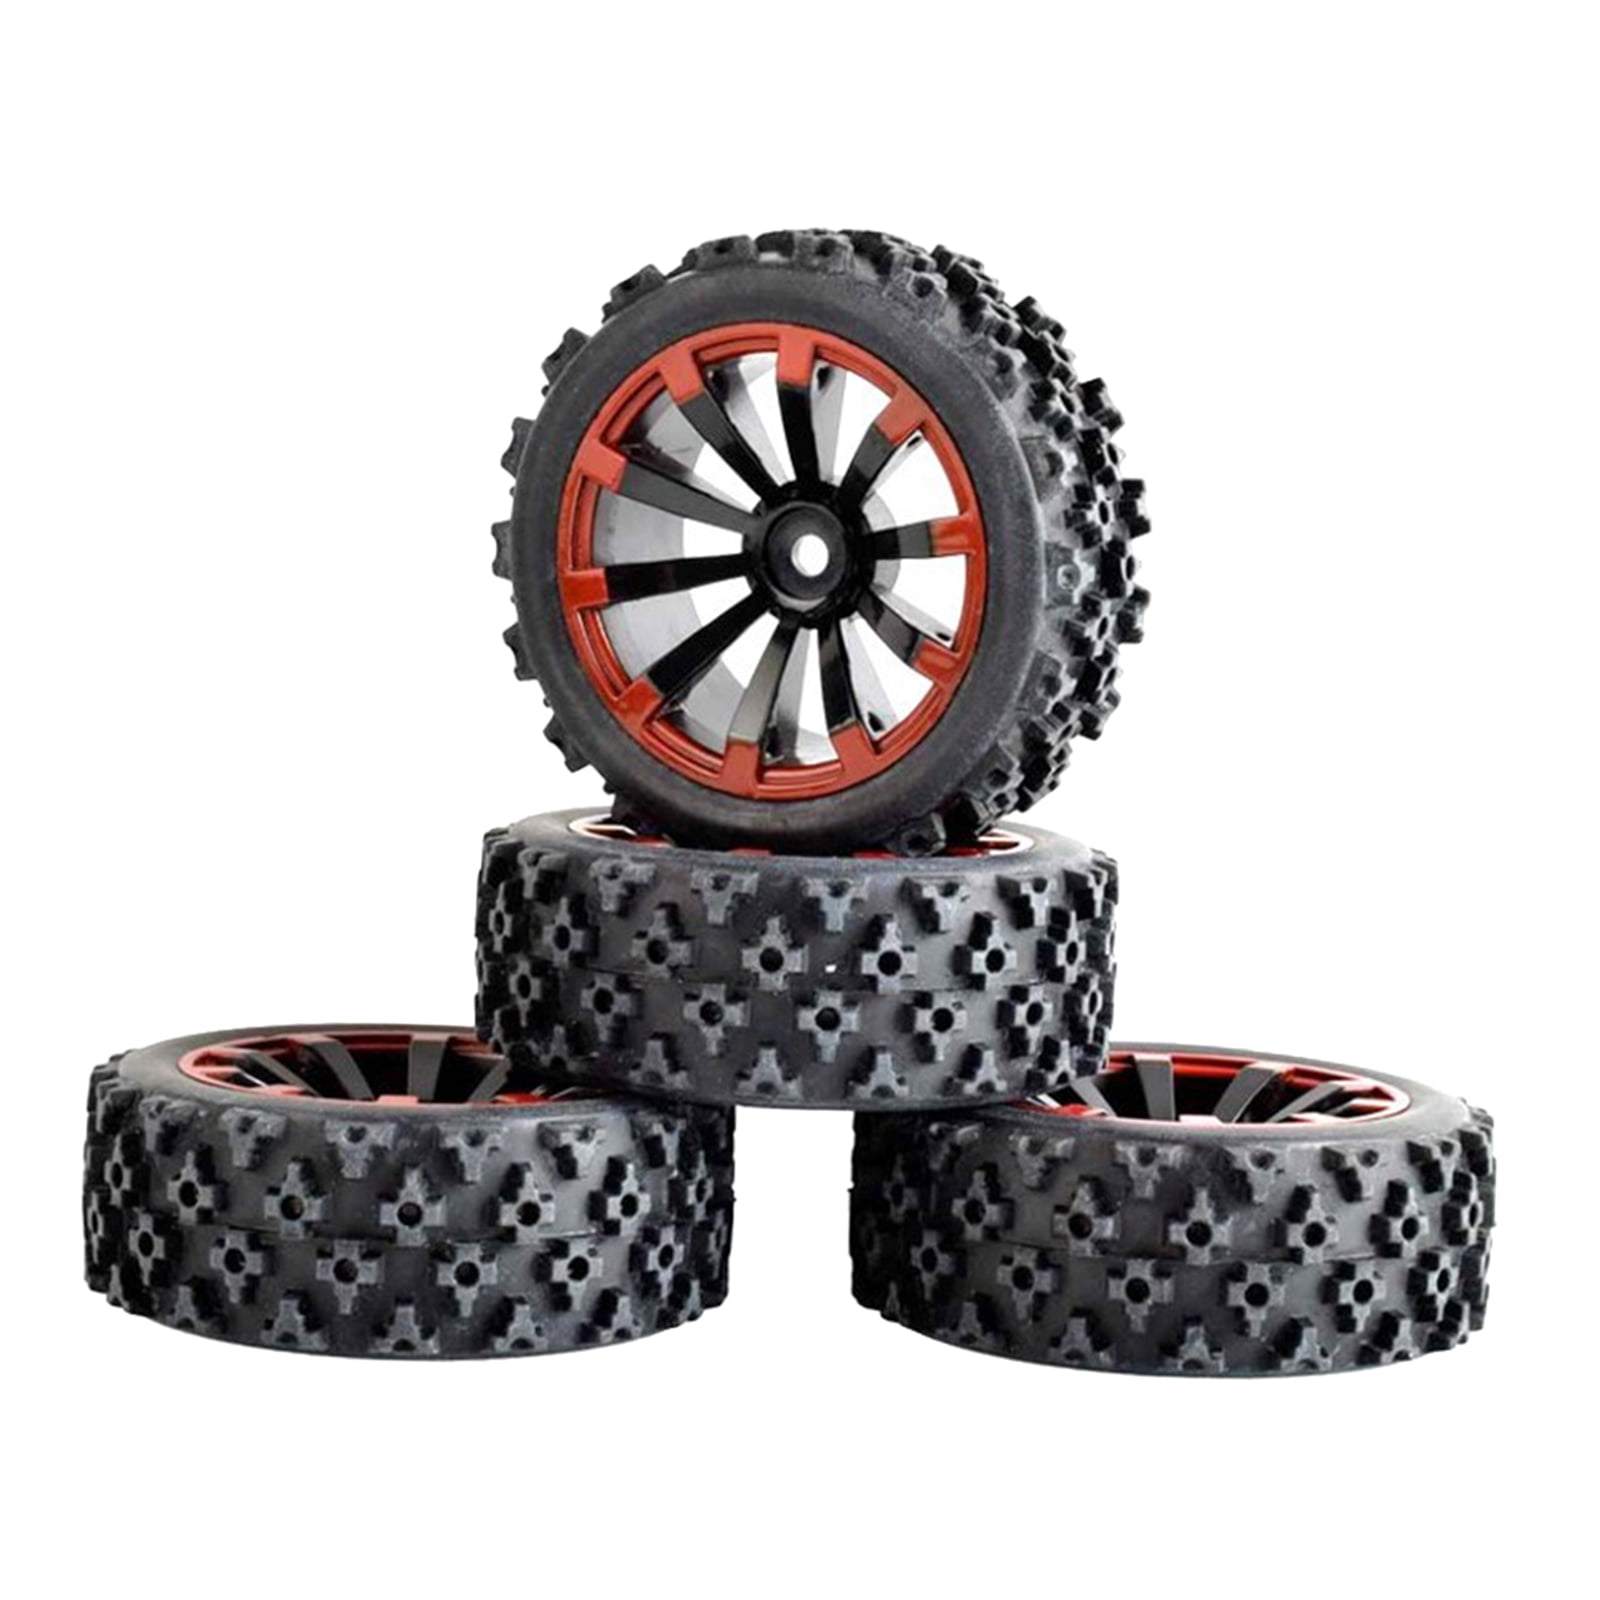 SM SunniMix 4Pcs 75mm 1/14 1/16 Scale Off Road Buggy Tires Wheel 12mm Hex Hubs for Wltoys 144001 124018 124019 RC Car F